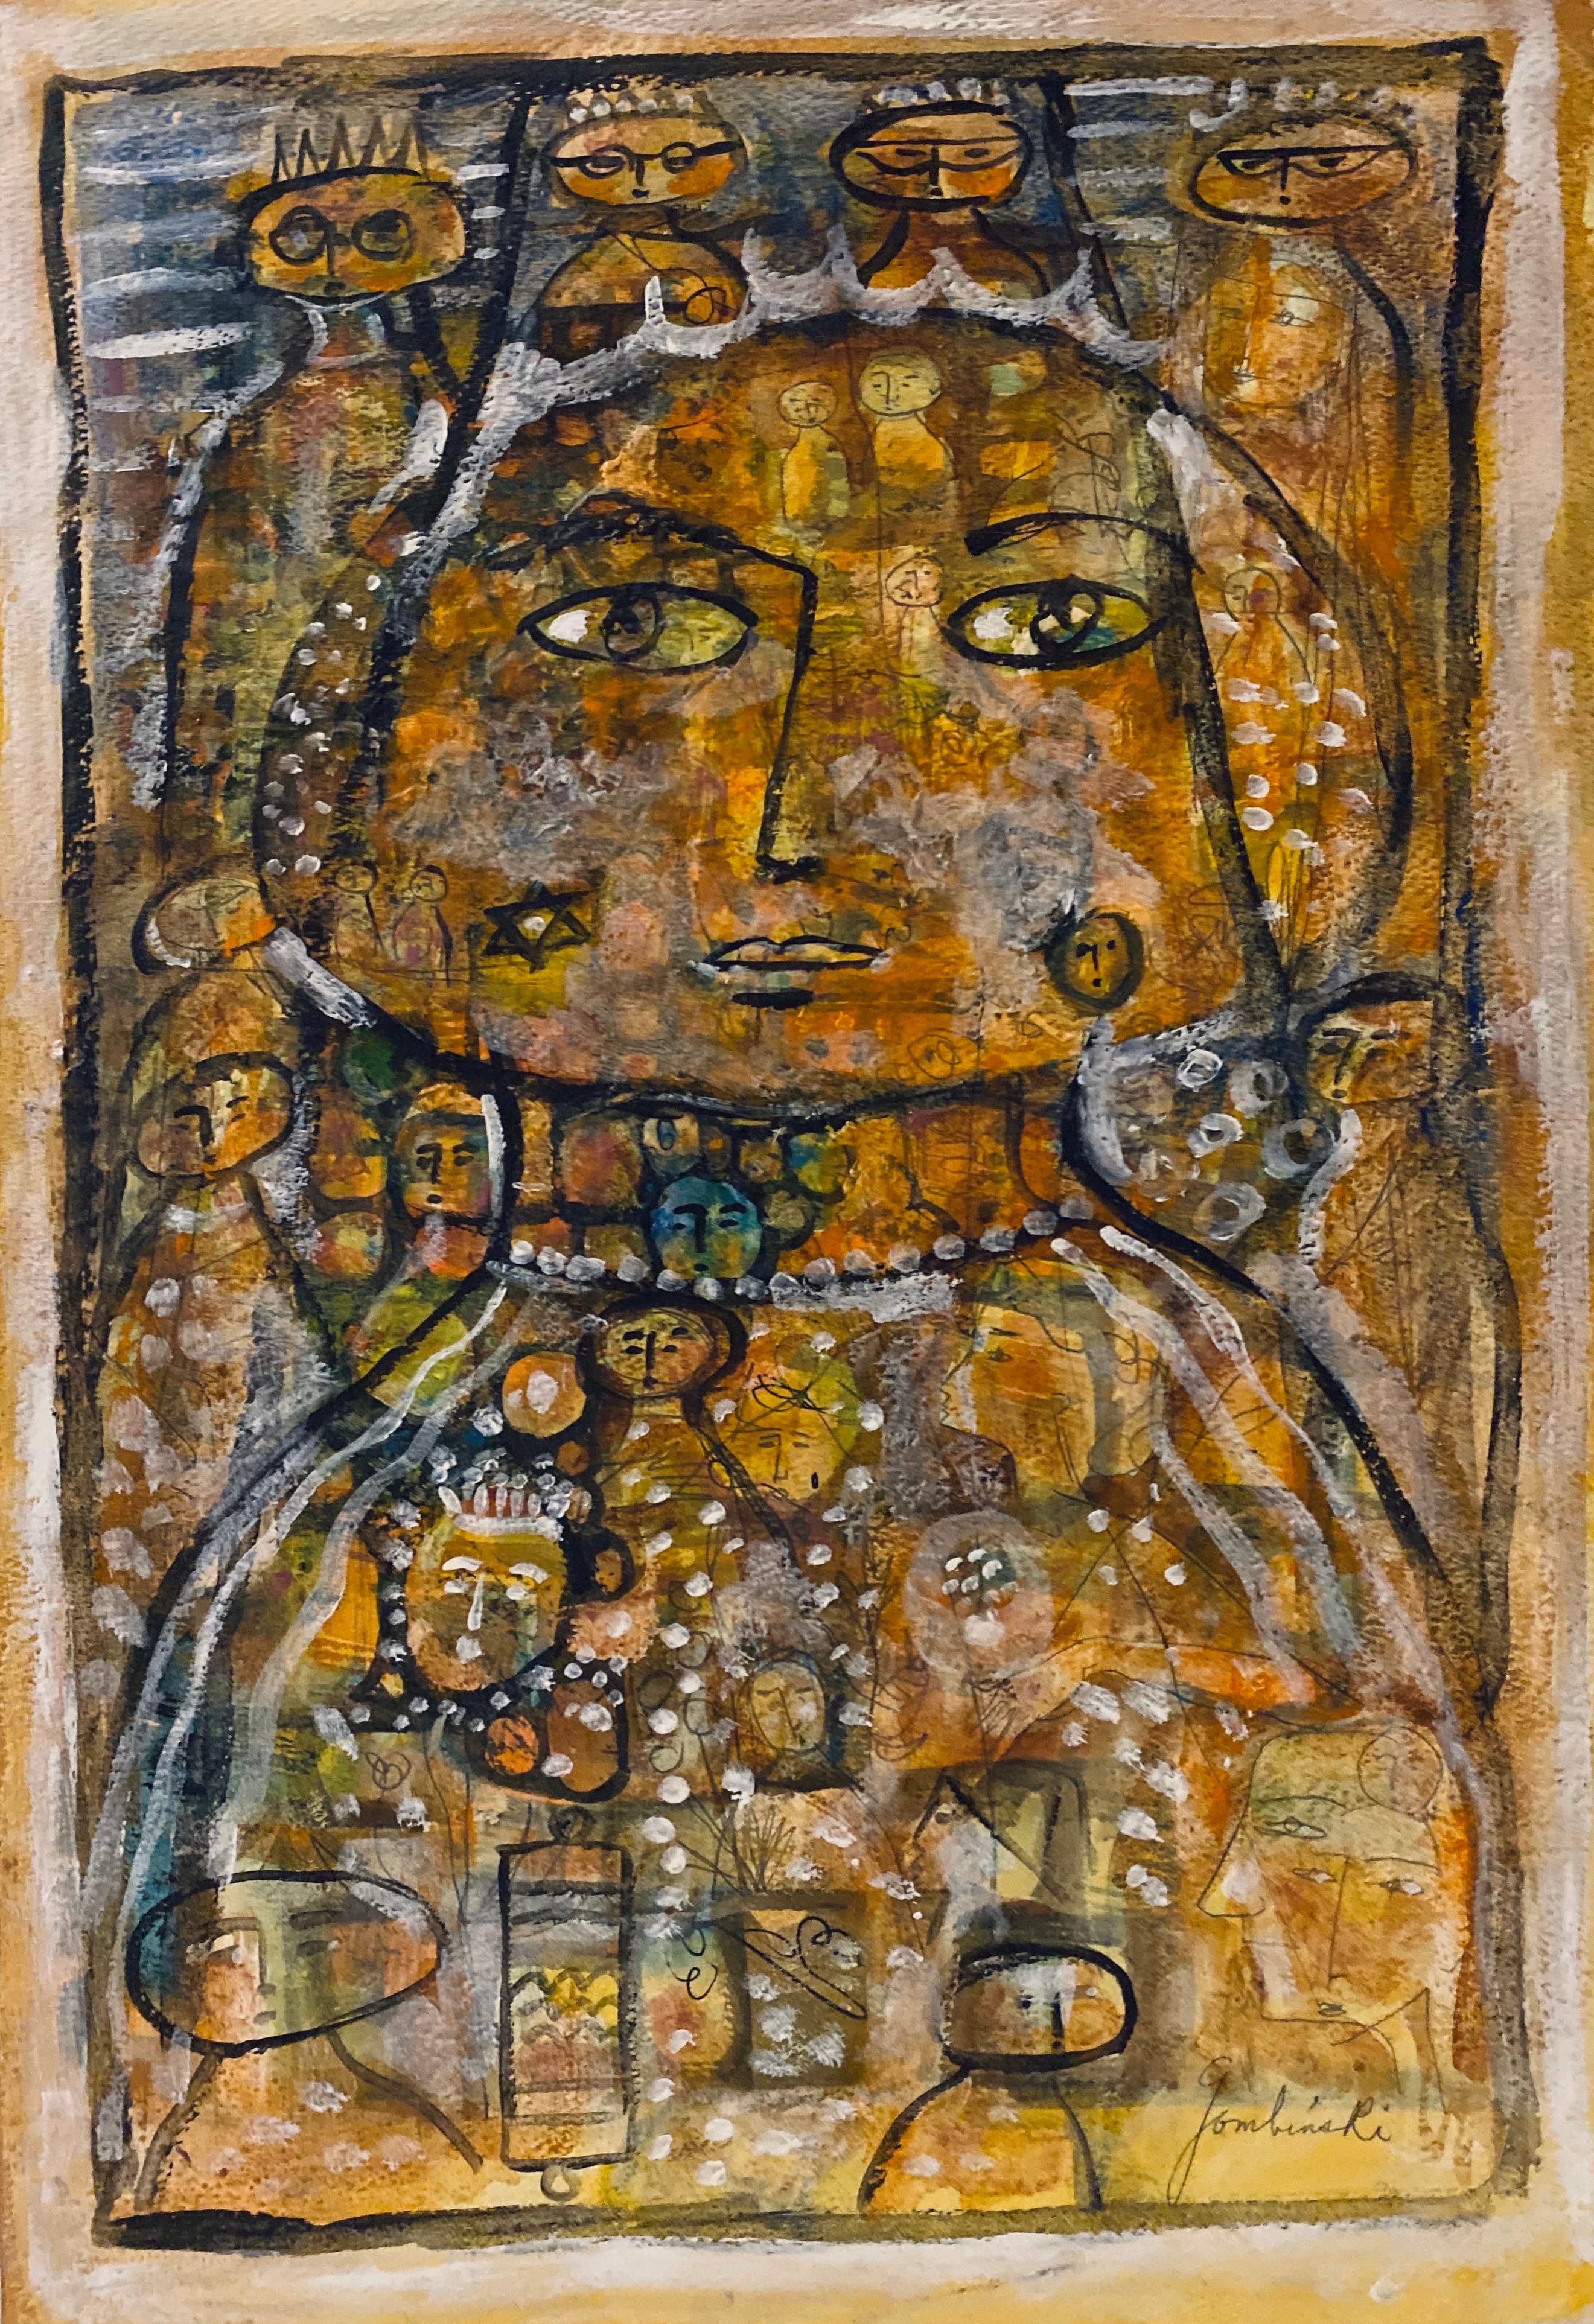 Rita Gombinski Figurative Art - Mixed Media Drawing and Painting Abstract Mod Colorful Faces Jewish Woman Artist